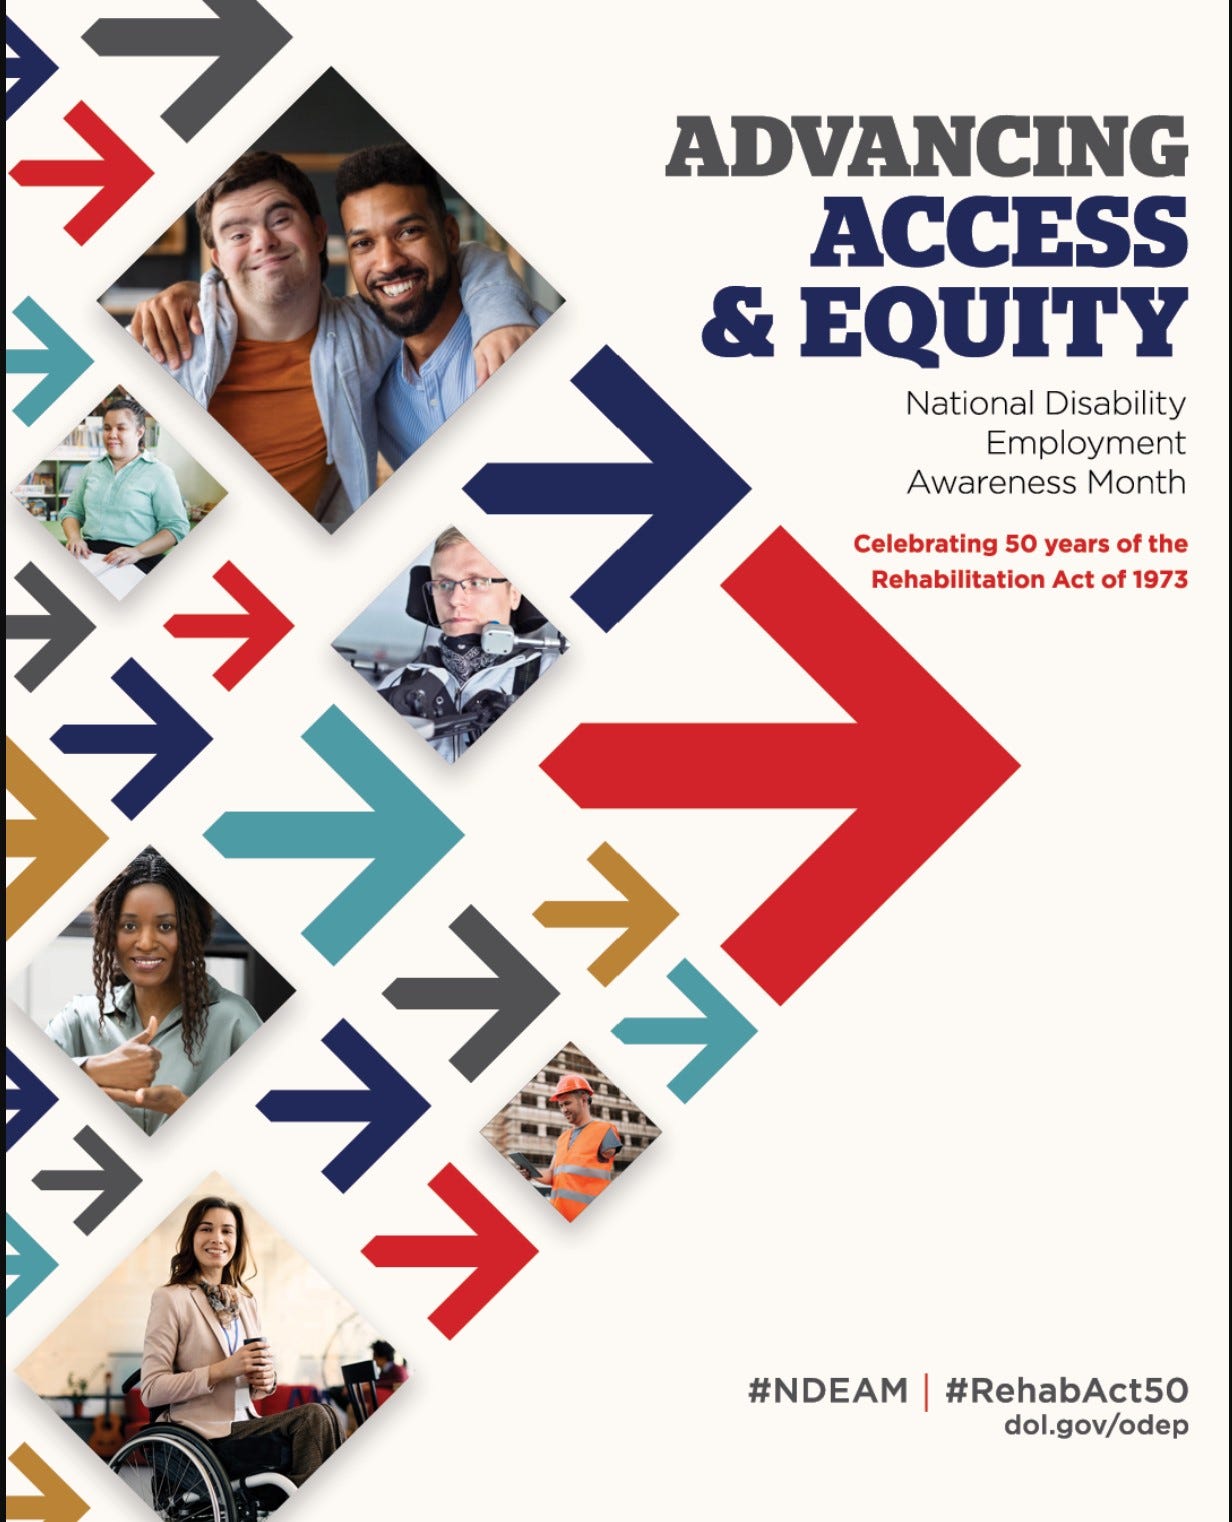  The words, “Advancing Access & Equity, National Disability Employment Awareness Month, Celebrating 50 years of the Rehabilitation Act of 1973” are placed to the right of a field of red, gray, teal, blue and yellow arrows. 